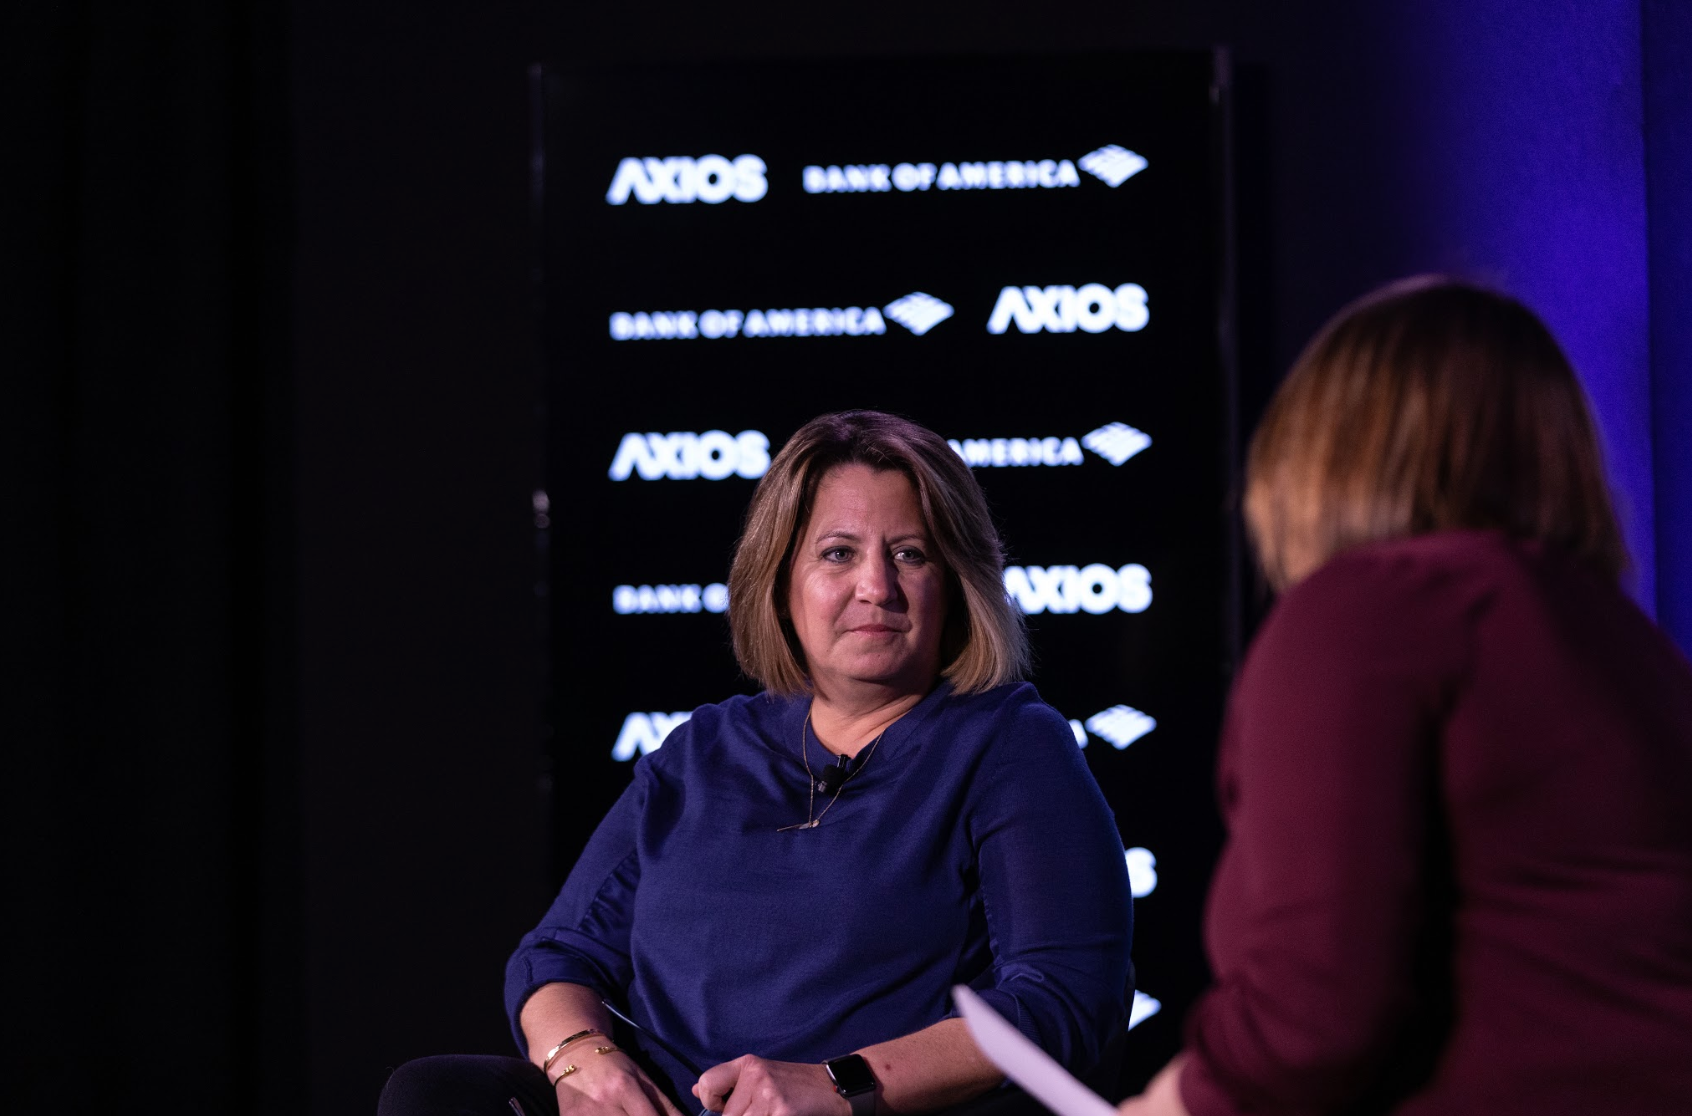 Lisa Monaco on the Axios stage with Margaret Talev.